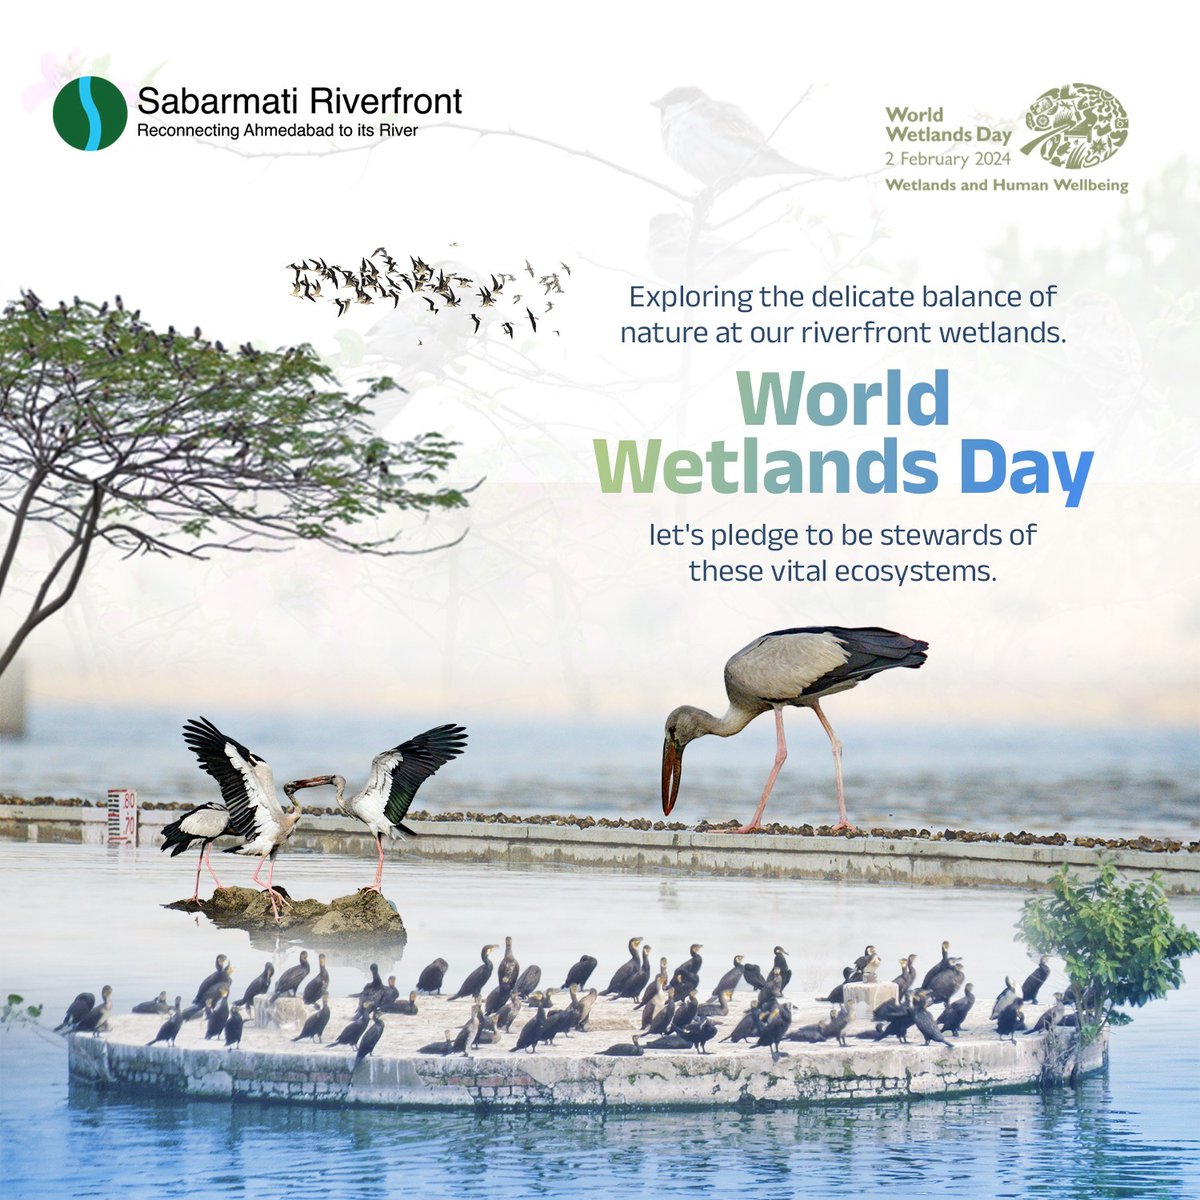 Dive deep into the heart of nature on Wetlands Day at Sabarmati Riverfront. Let's celebrate and preserve these vital ecosystems!
 #wetlandsday #Sabarmatiriverfront #riverfront #ahmedabad #rivers